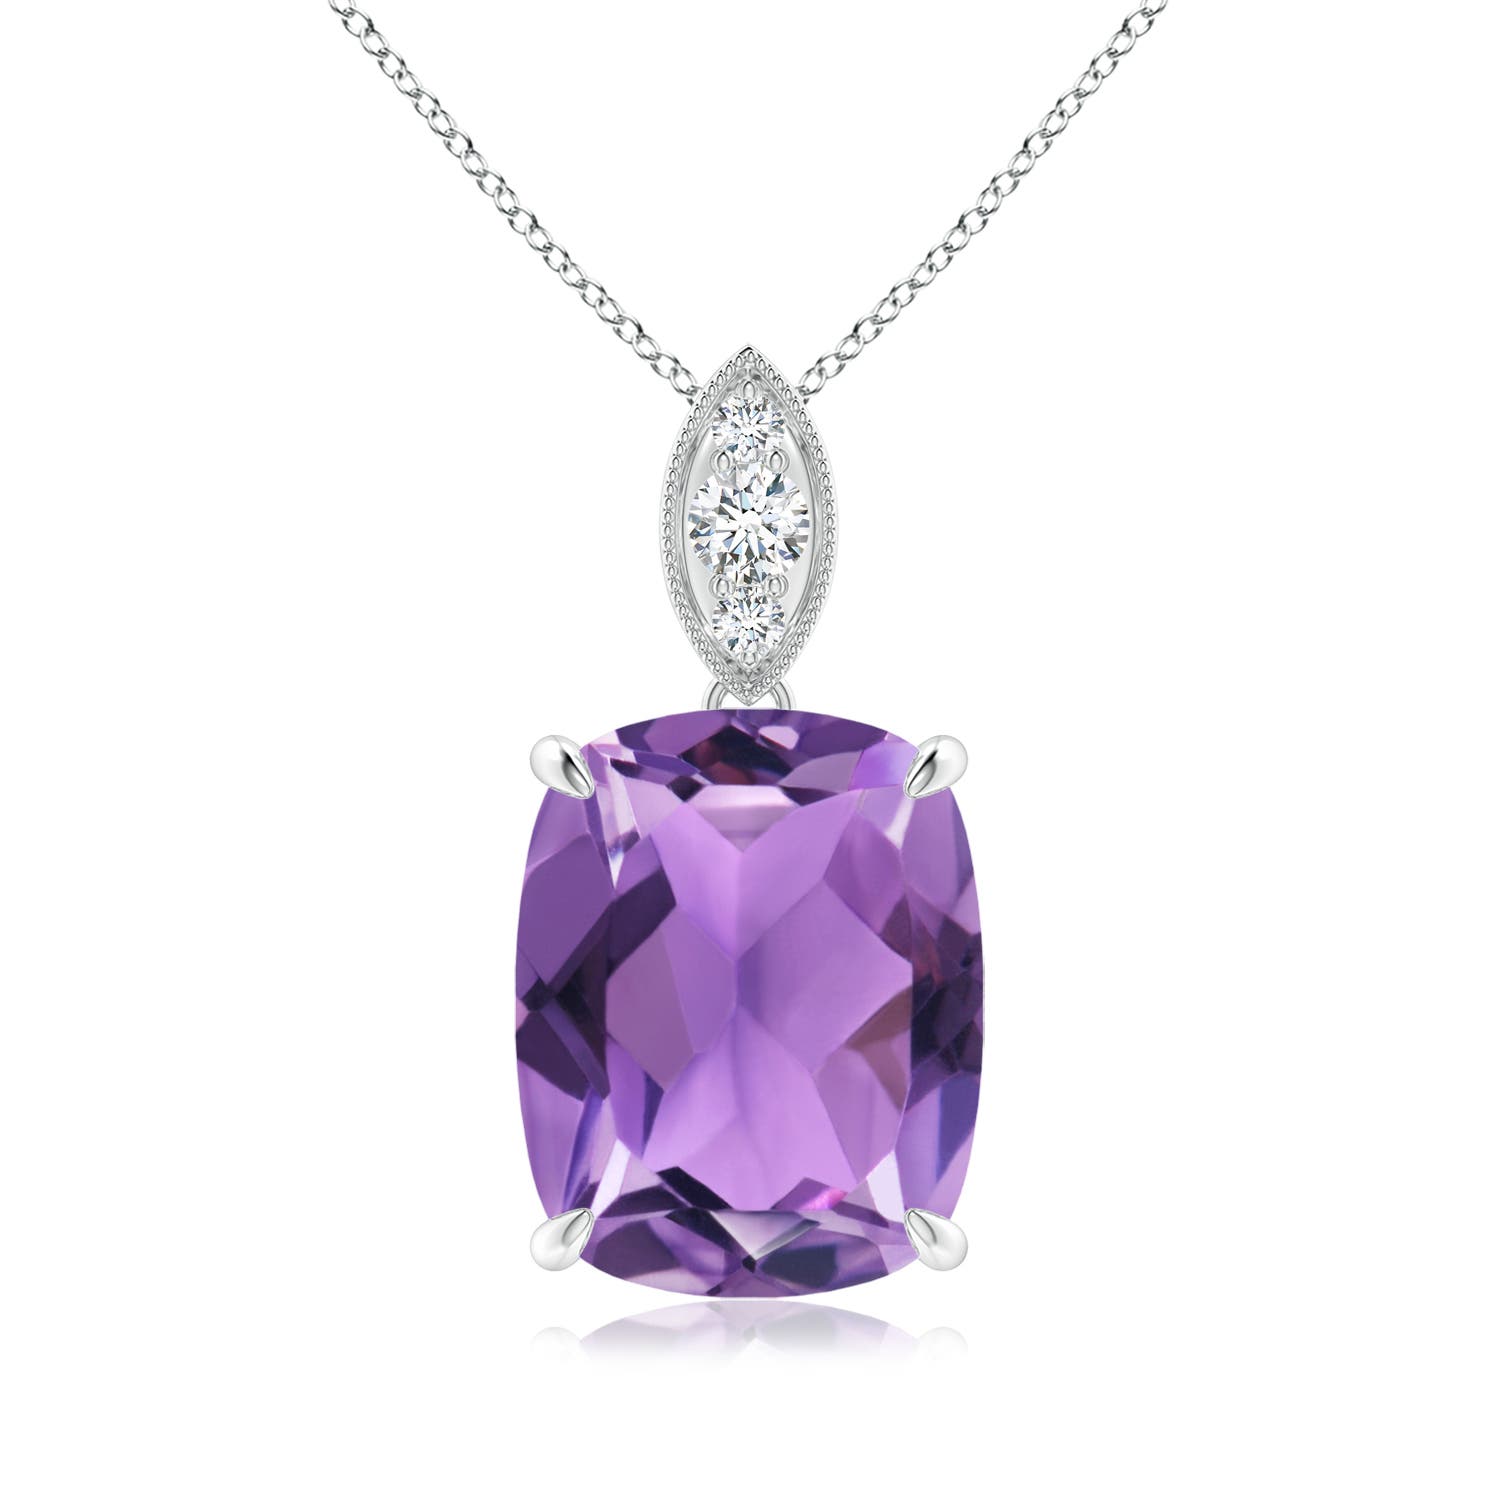 AA - Amethyst / 3.57 CT / 14 KT White Gold